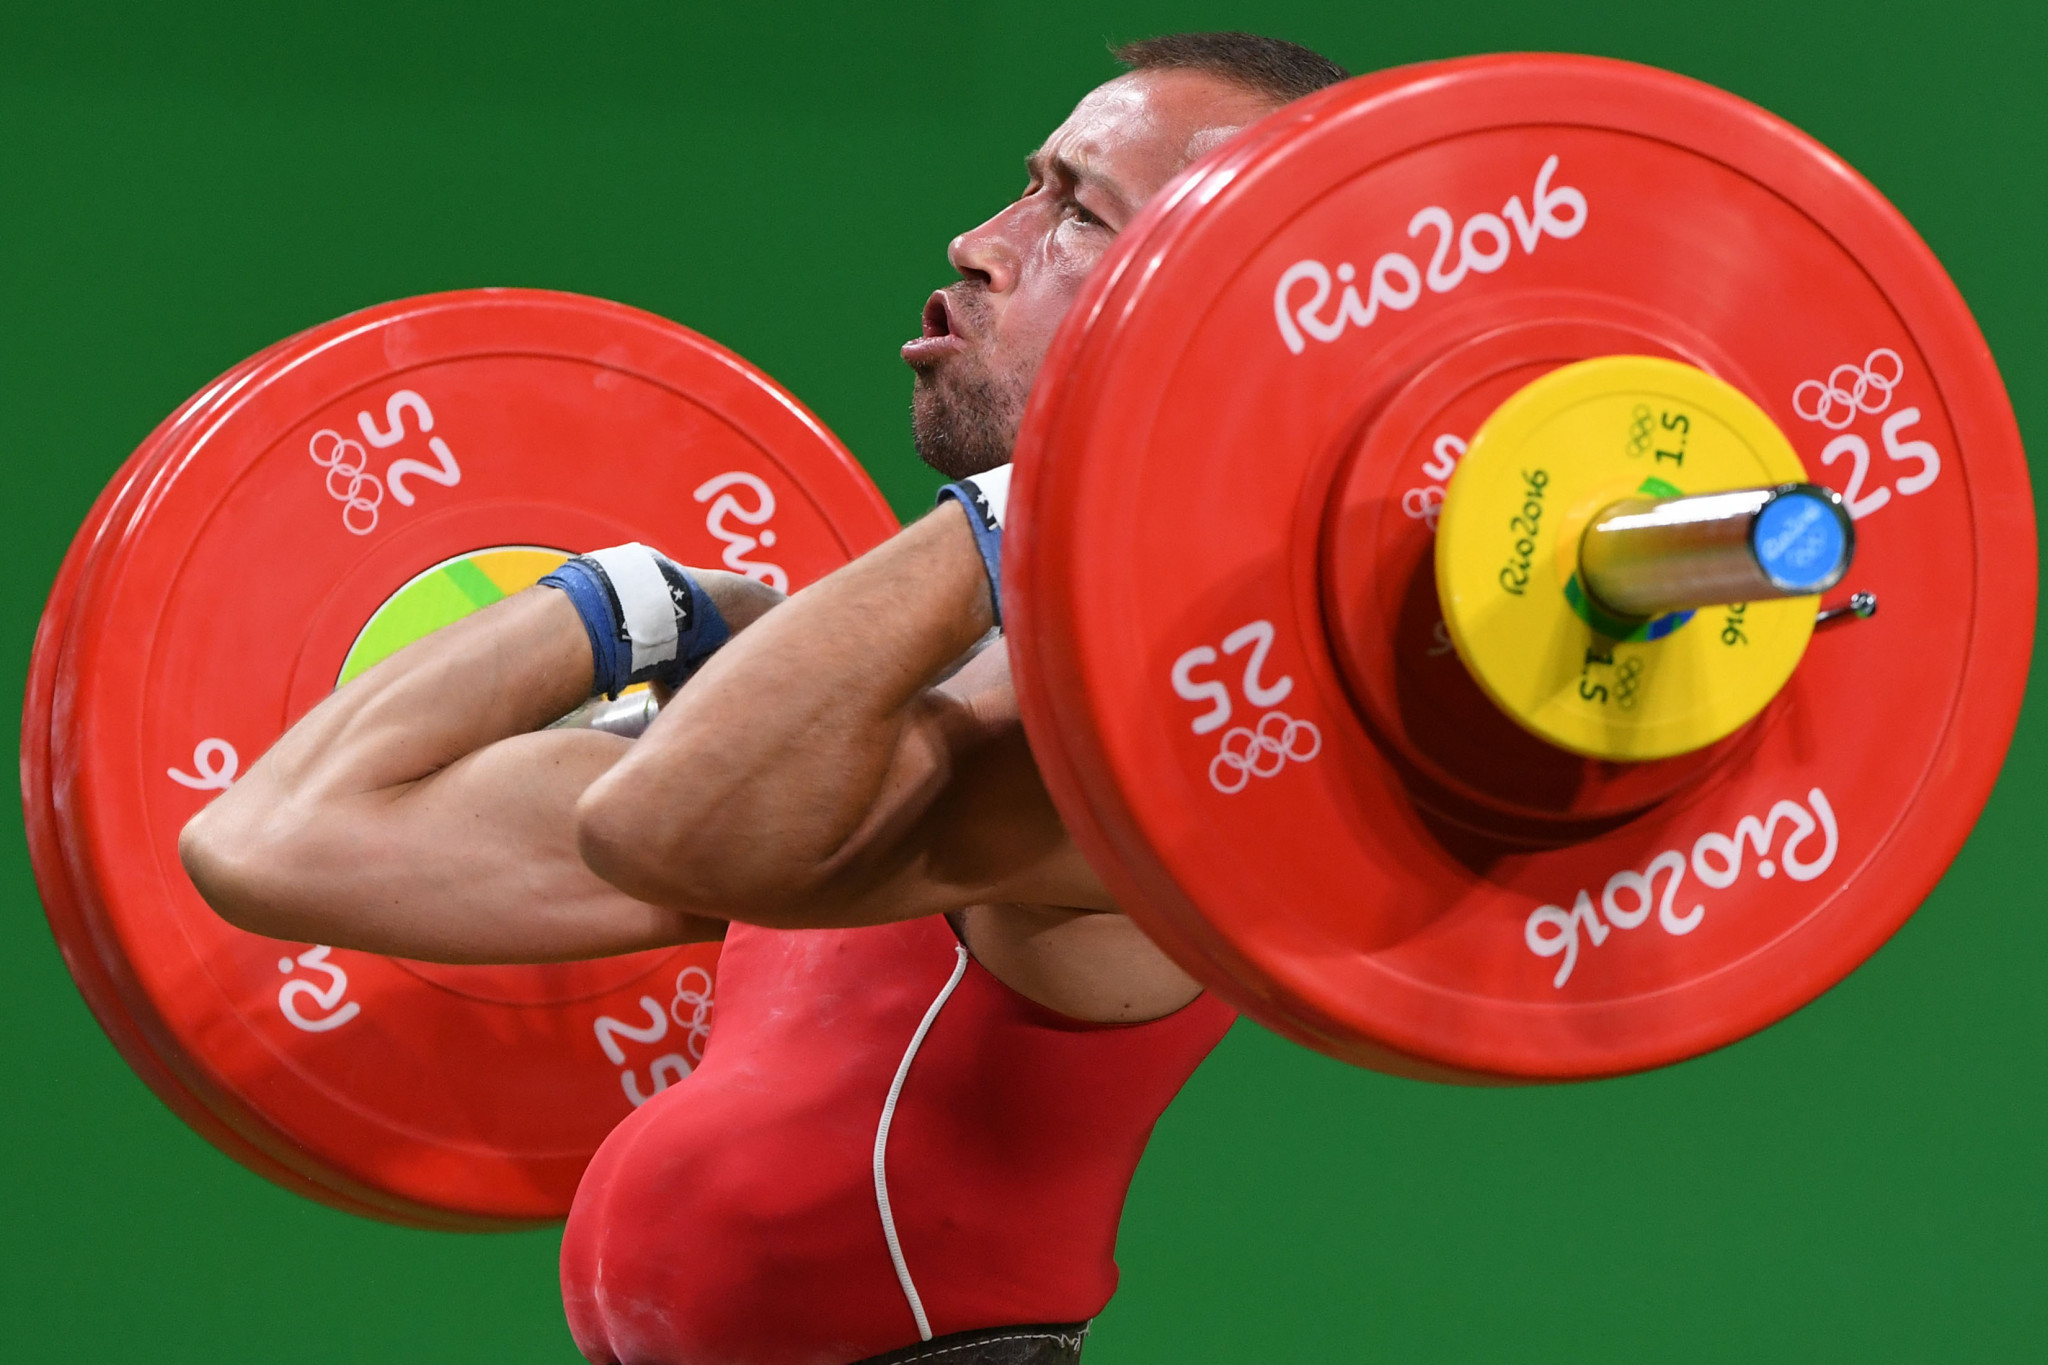 Exclusive: More than 40 weightlifters banned from European Championships amid WADA data controversy